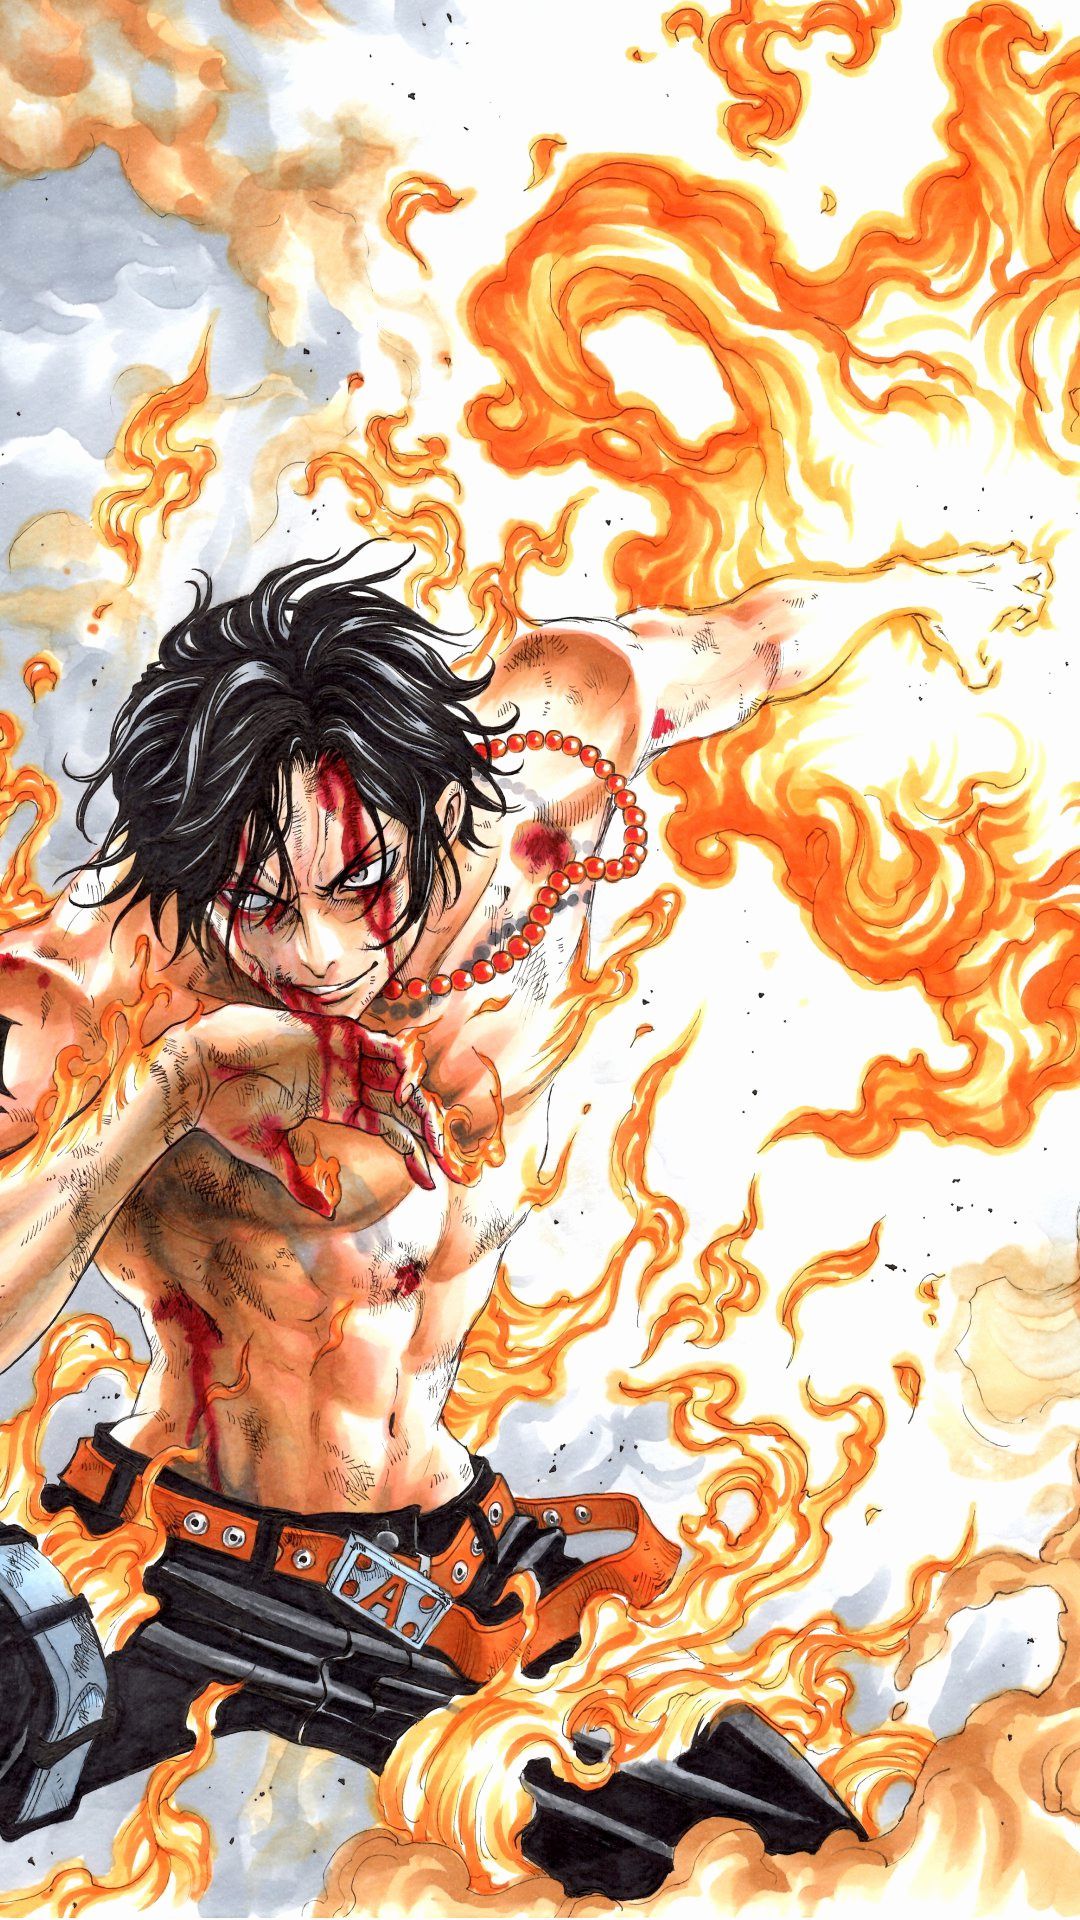 Wallpaper ID 423016  Anime One Piece Phone Wallpaper Monkey D Luffy  828x1792 free download